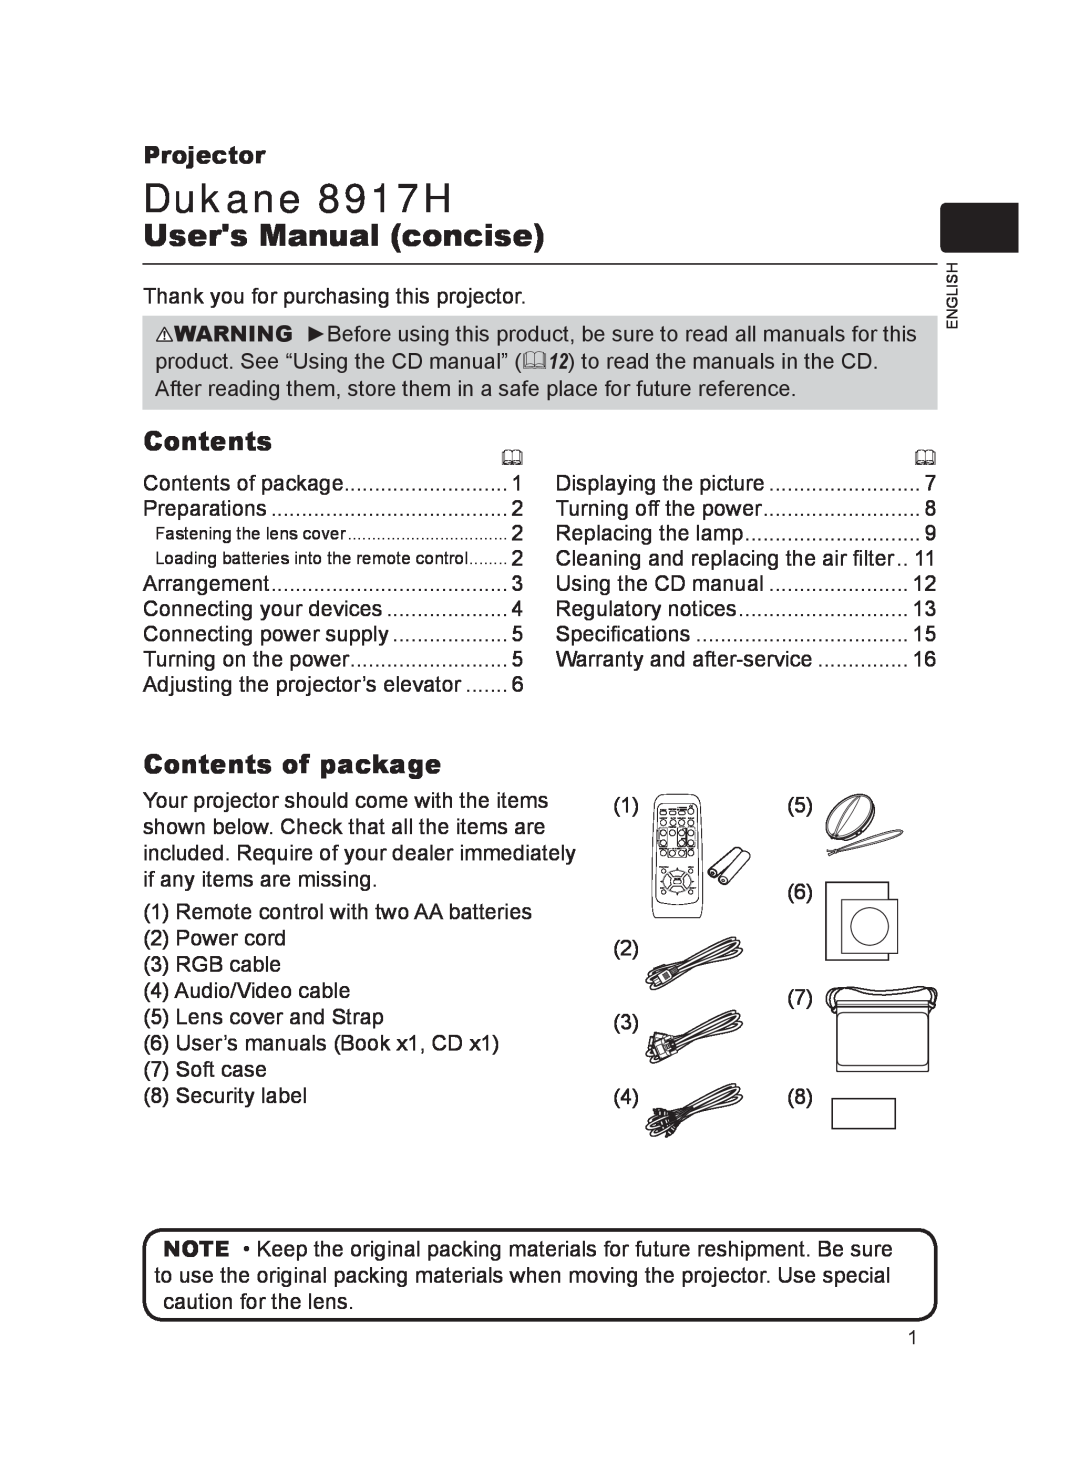 Dukane user manual Contents of package, Projector, Dukane 8917H, Users Manual concise 